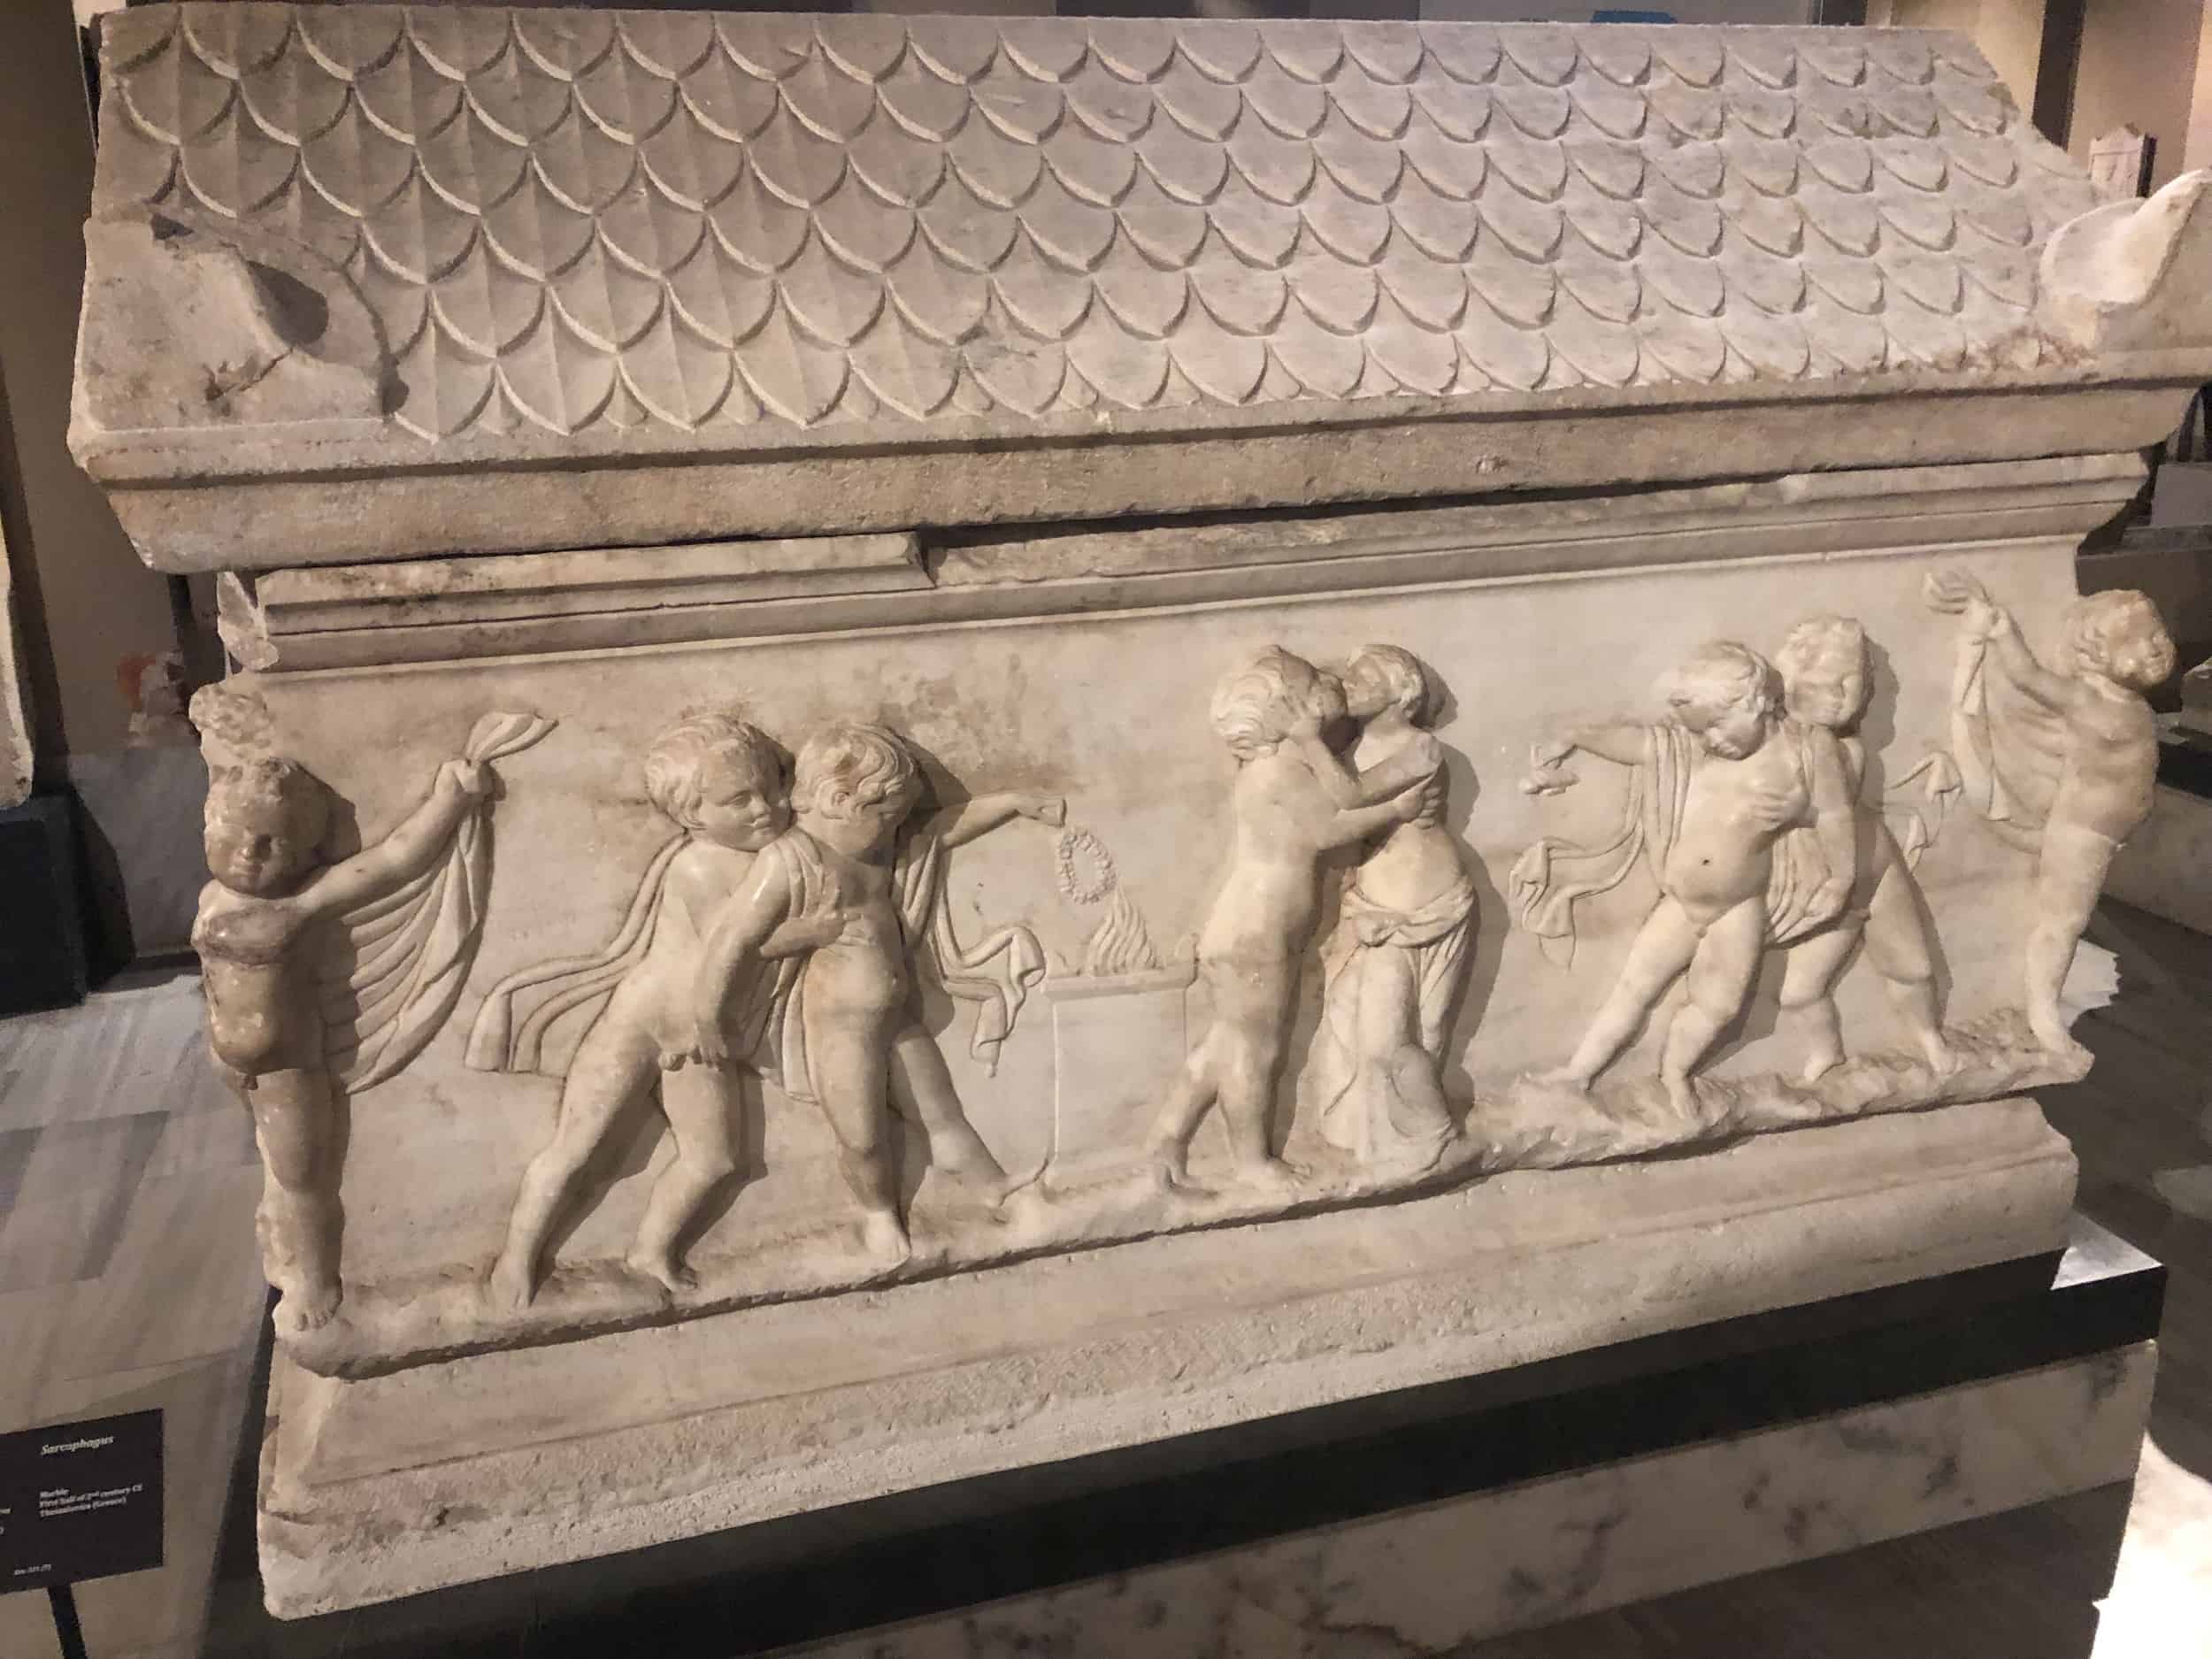 Sarcophagus; marble; first half of the 2nd century; Thessaloniki, Greece at the Istanbul Archaeology Museum in Istanbul, Turkey